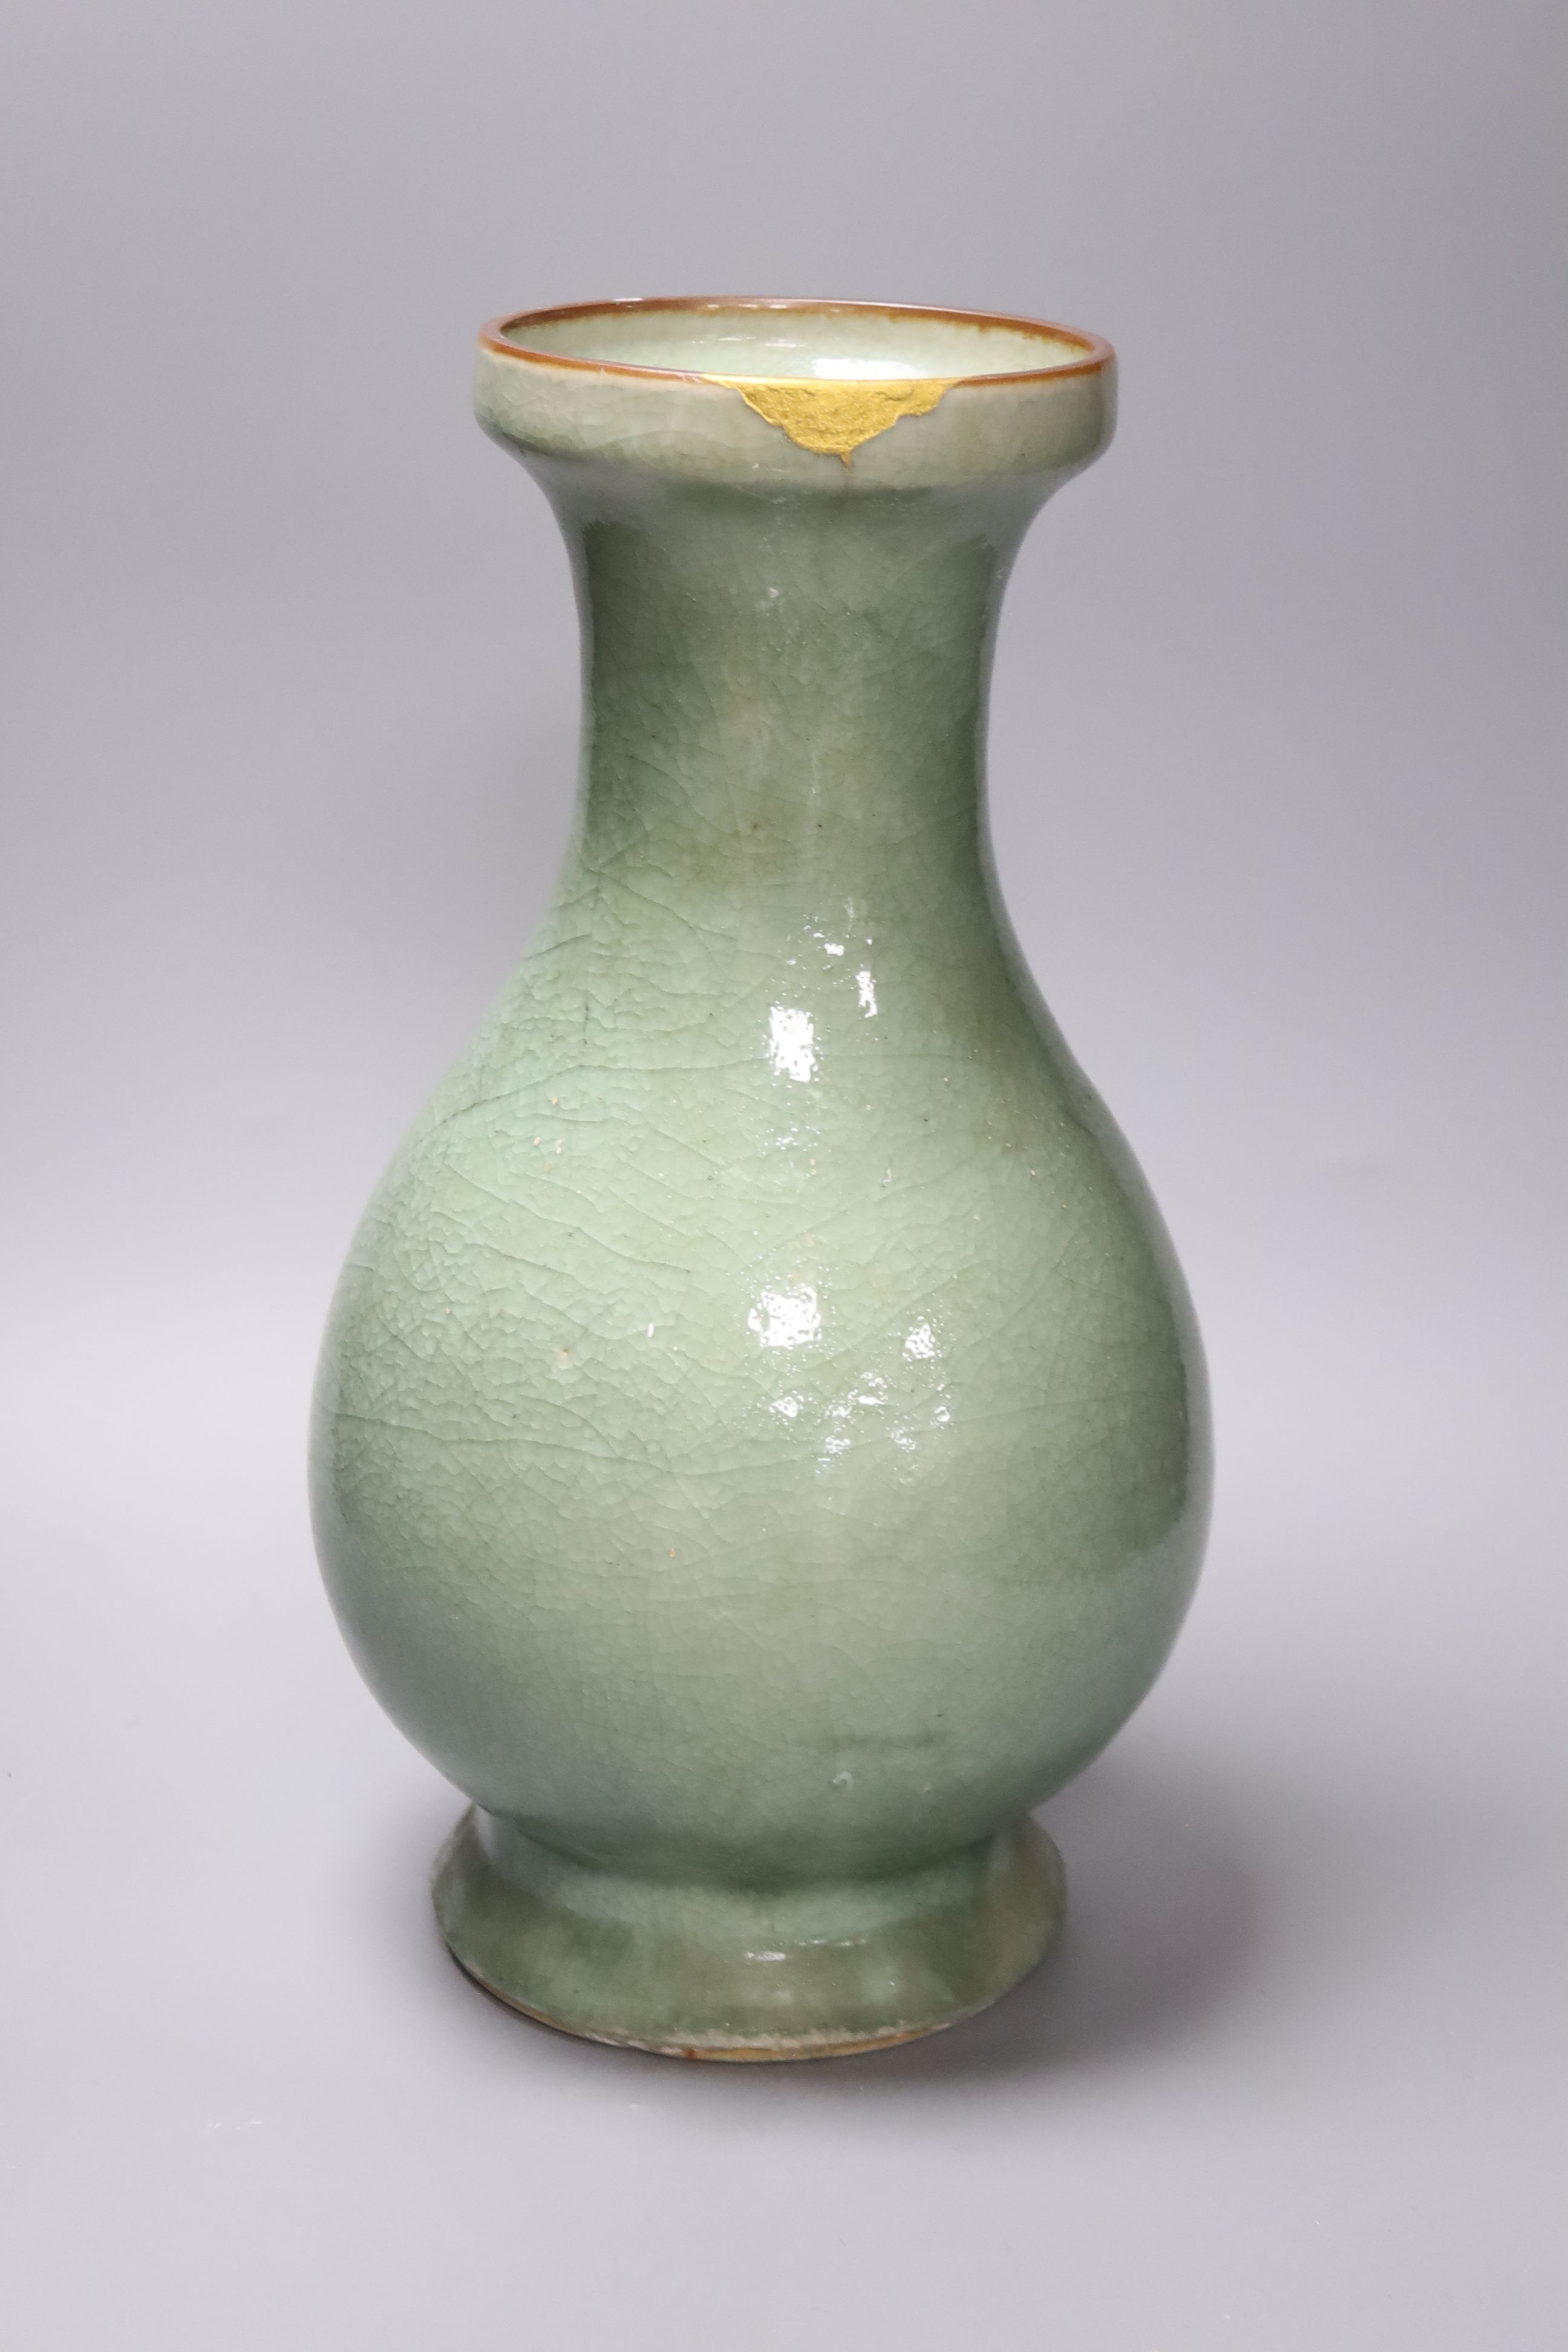 A Chinese celadon crackleglaze vase, probably 17th century or earlier, height 38cm